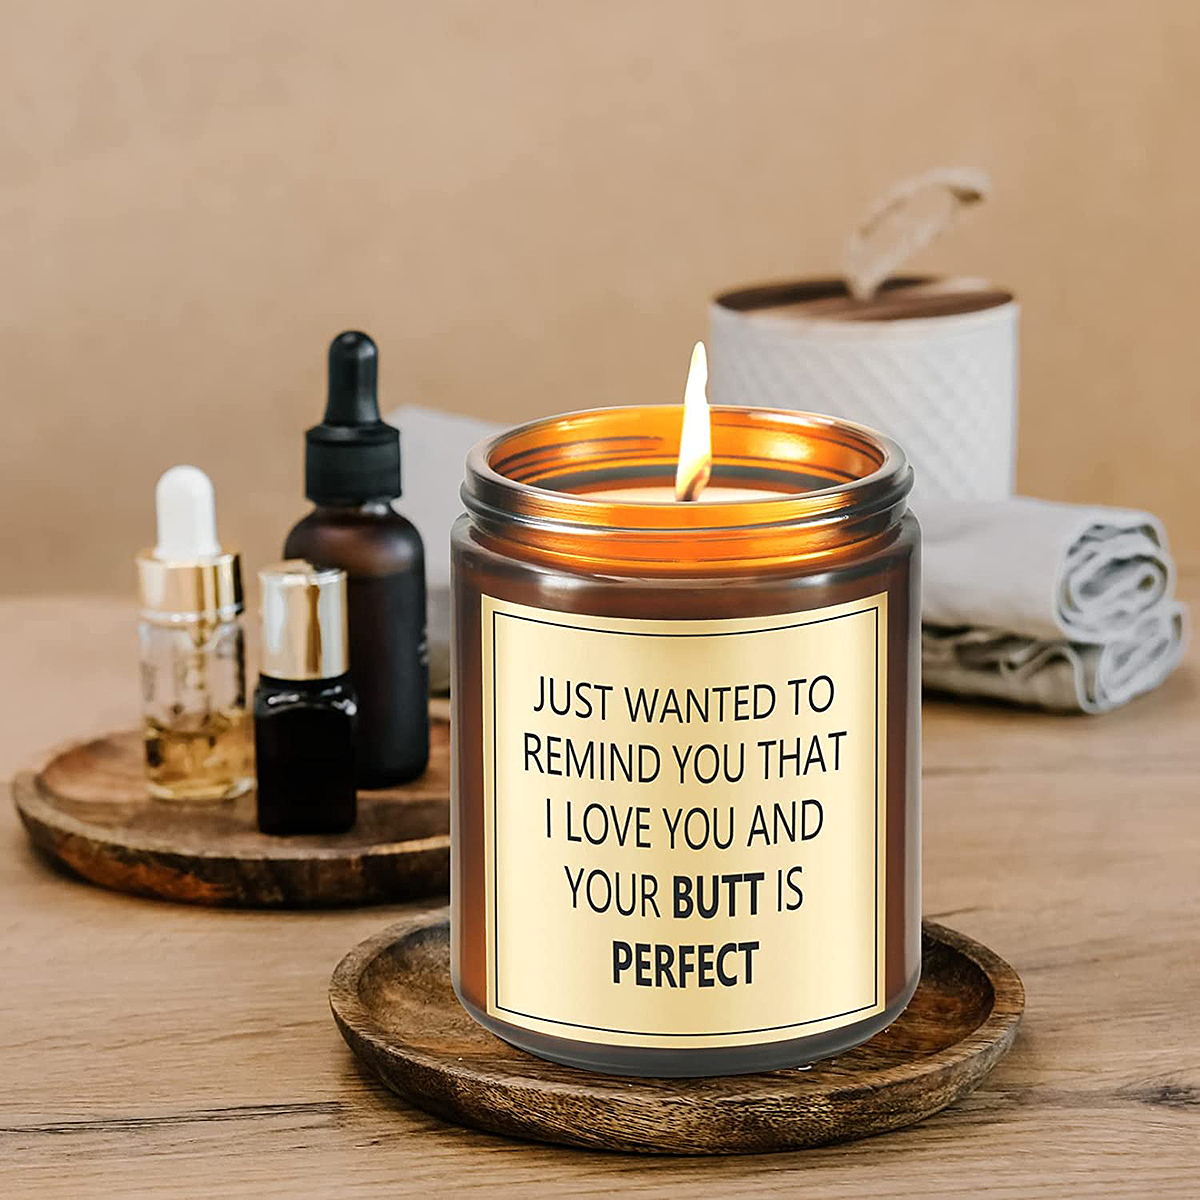 14 funny Valentine's Day gifts under £20 to make your other half laugh |  HELLO!